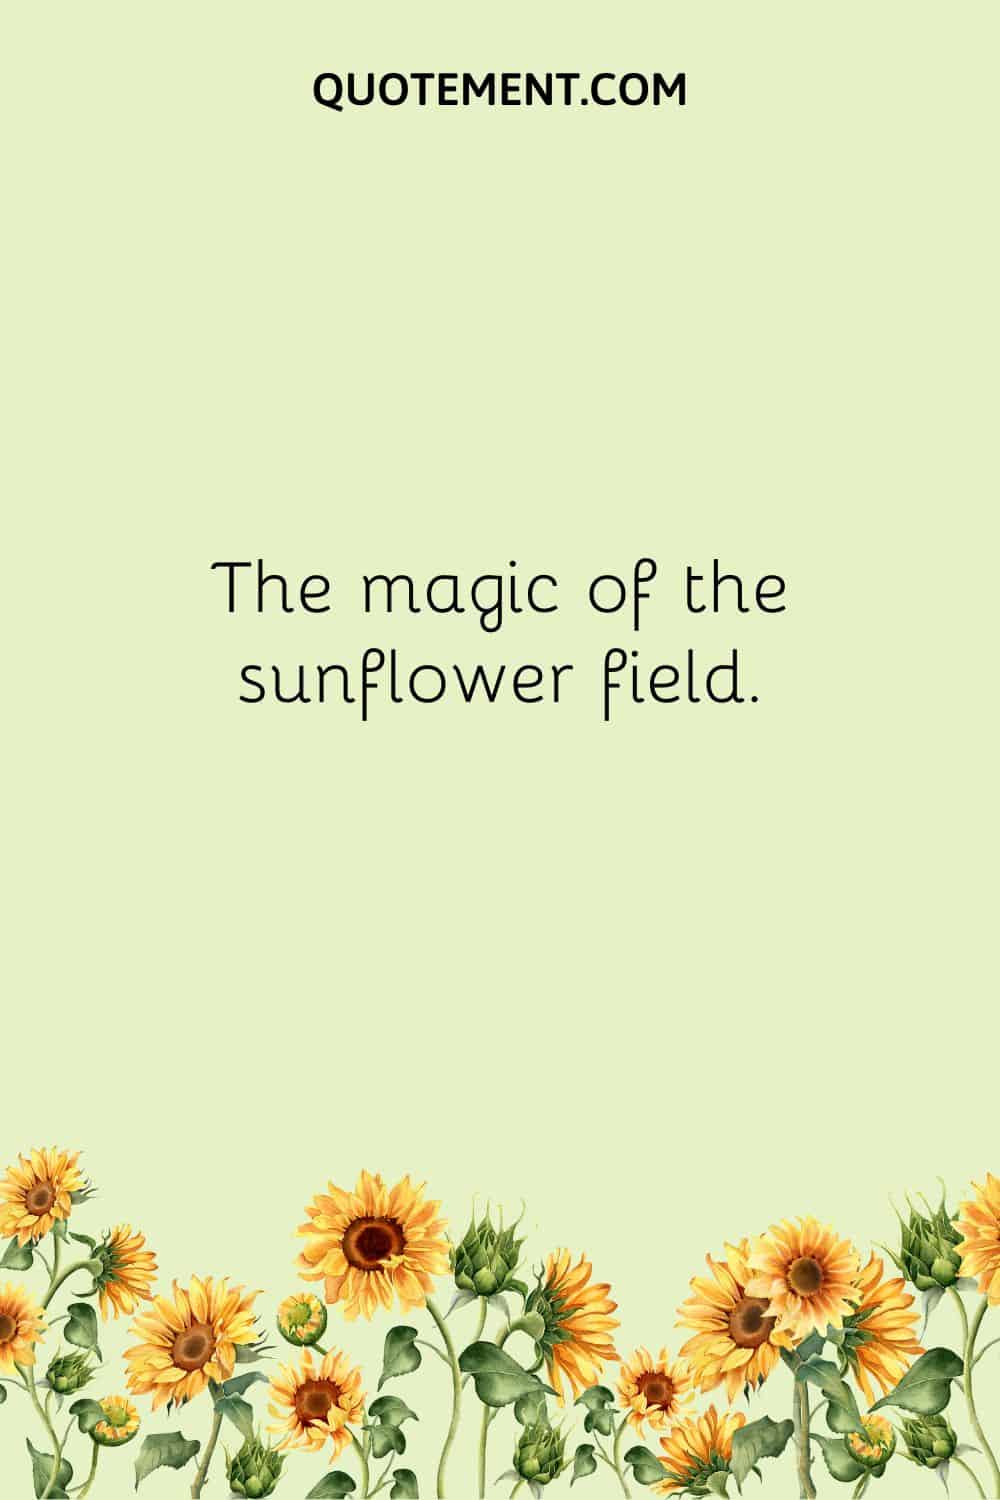 The magic of the sunflower field.